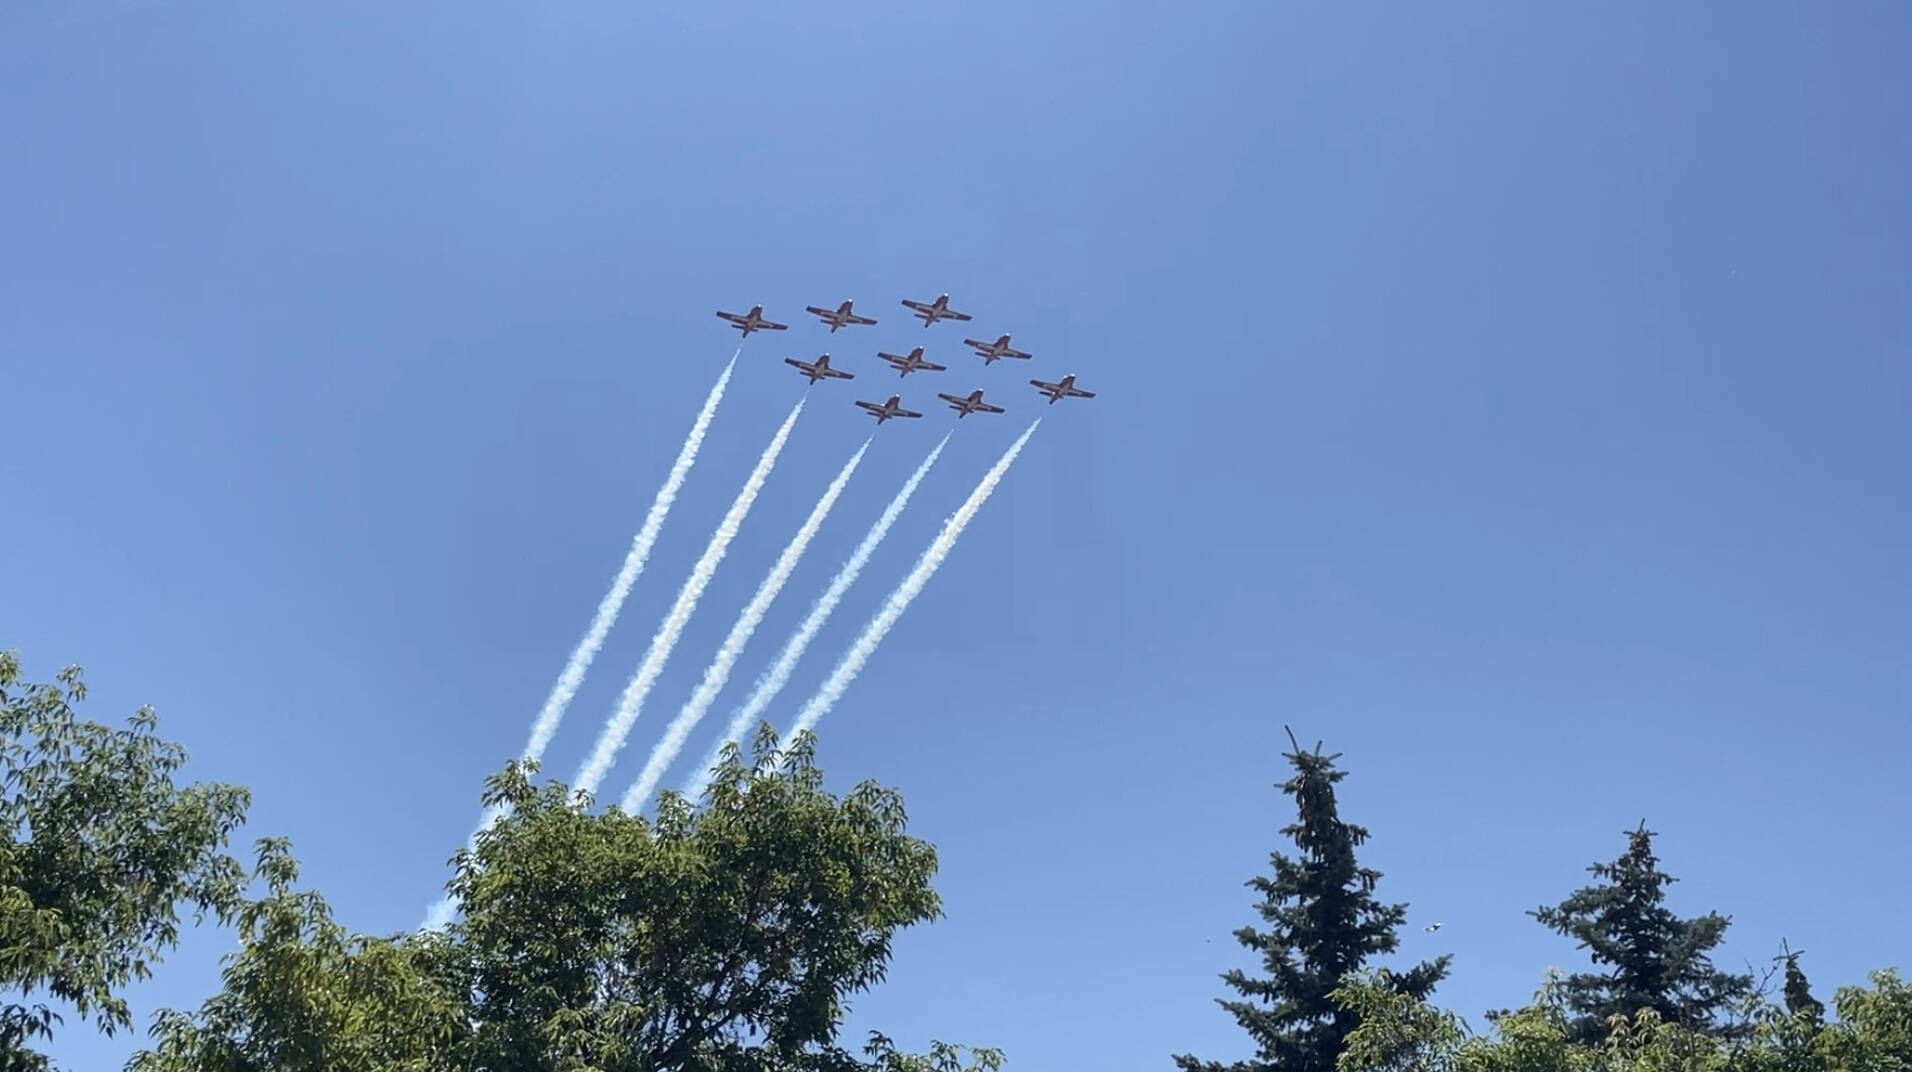 The flyover from the Snowbirds on July 26. (Photo by Kelsey Yates)